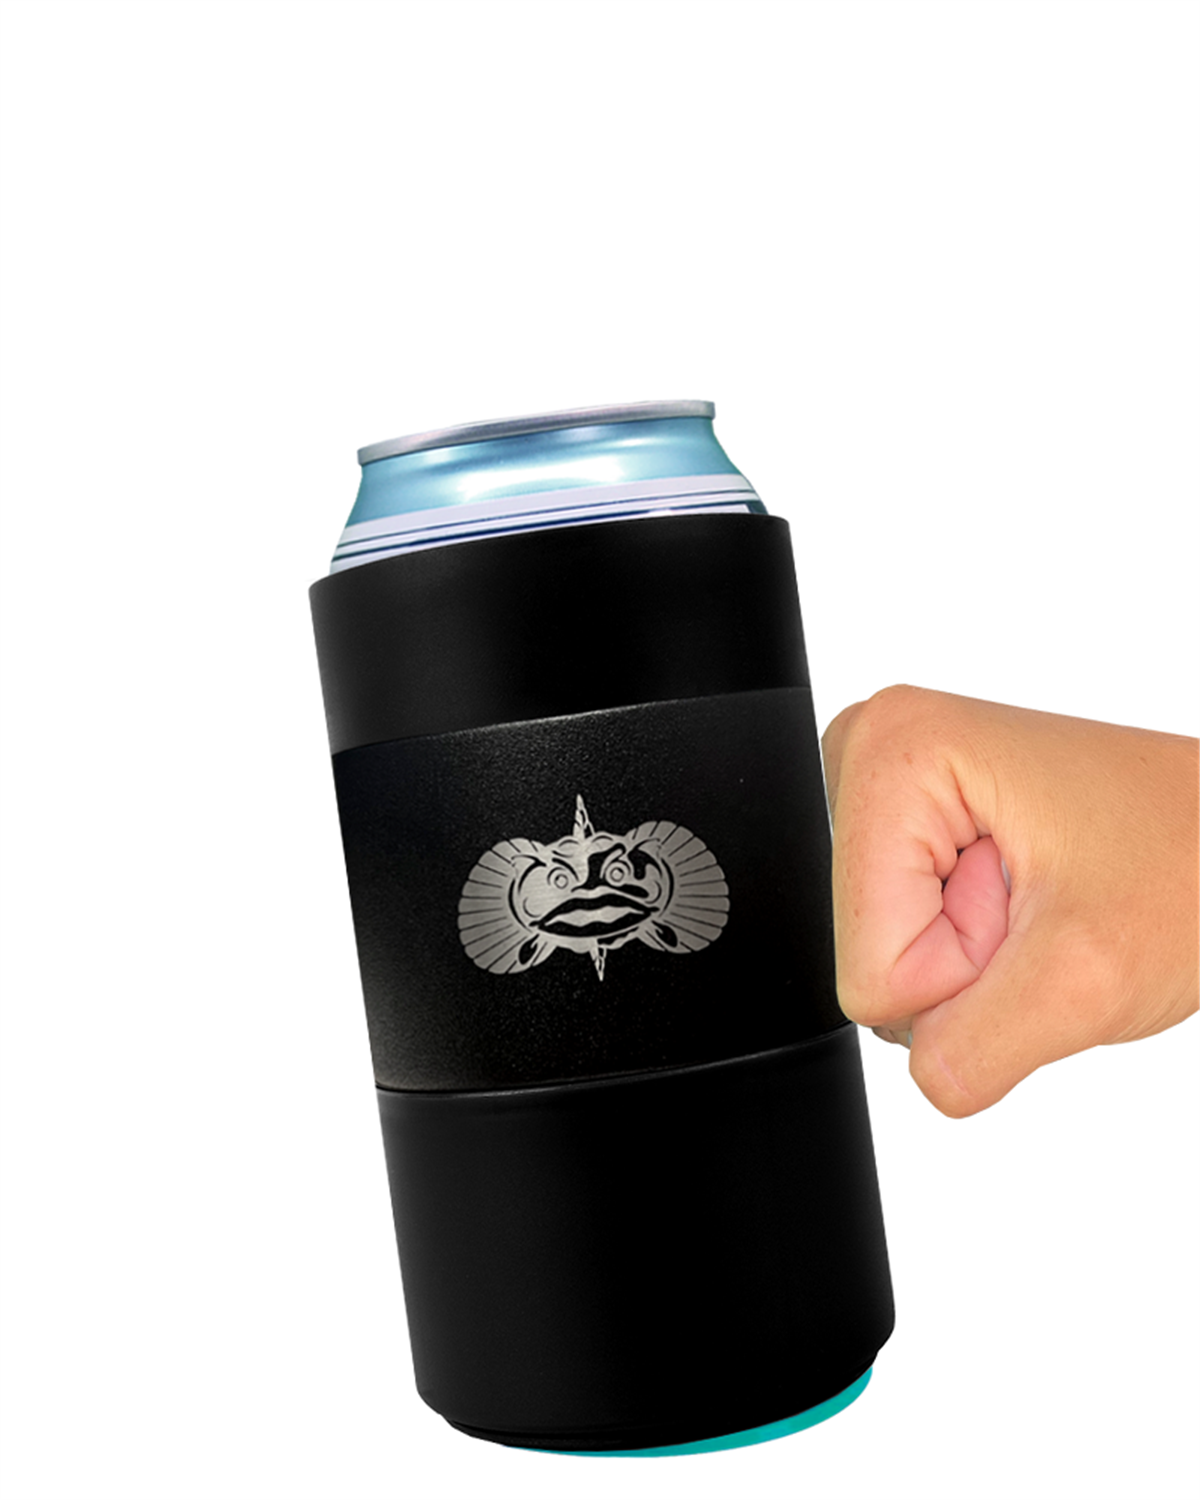 TOADFISH Toadfish Non-Tipping Insulated Can Cooler